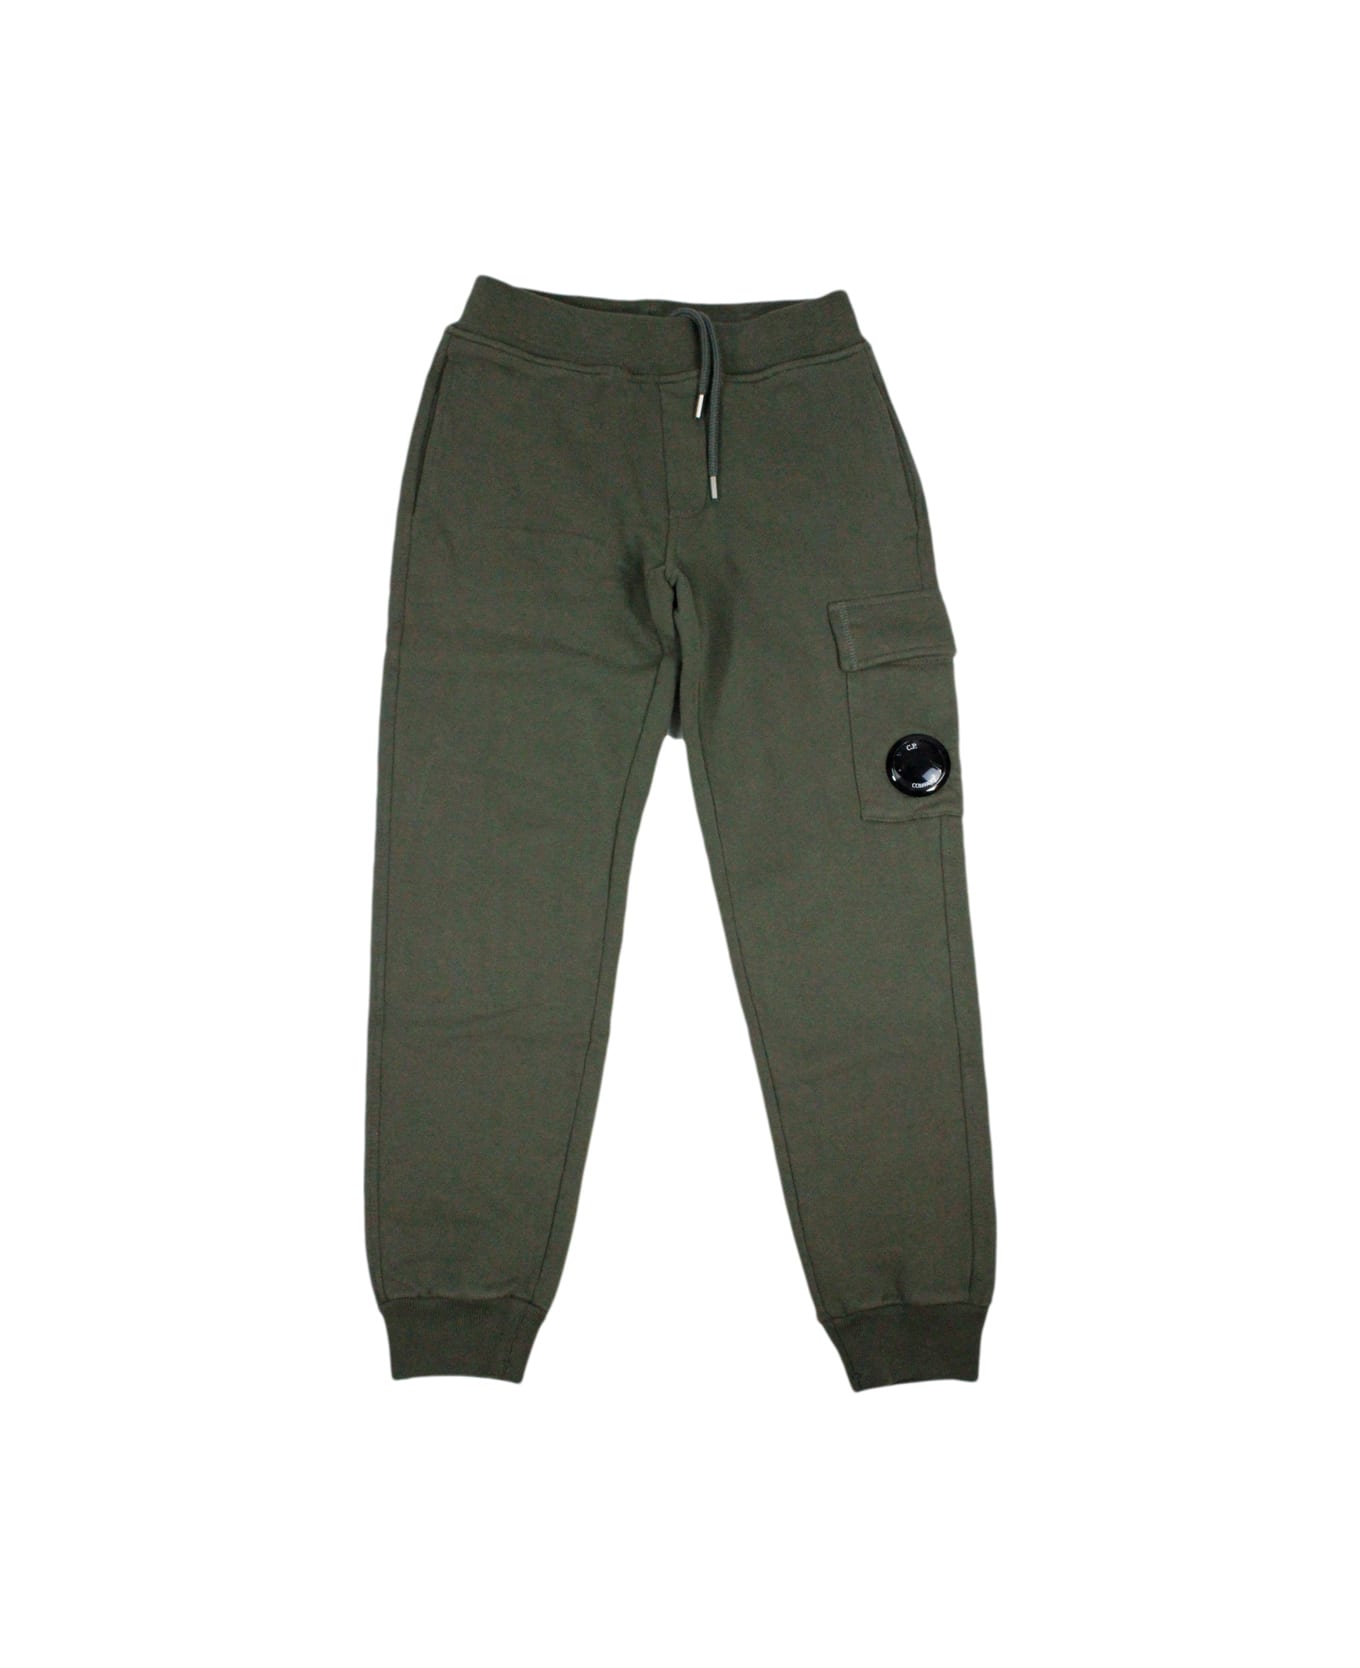 C.P. Company Breathable Fleece Cotton Trousers With Drawstring Waist - Military ボトムス